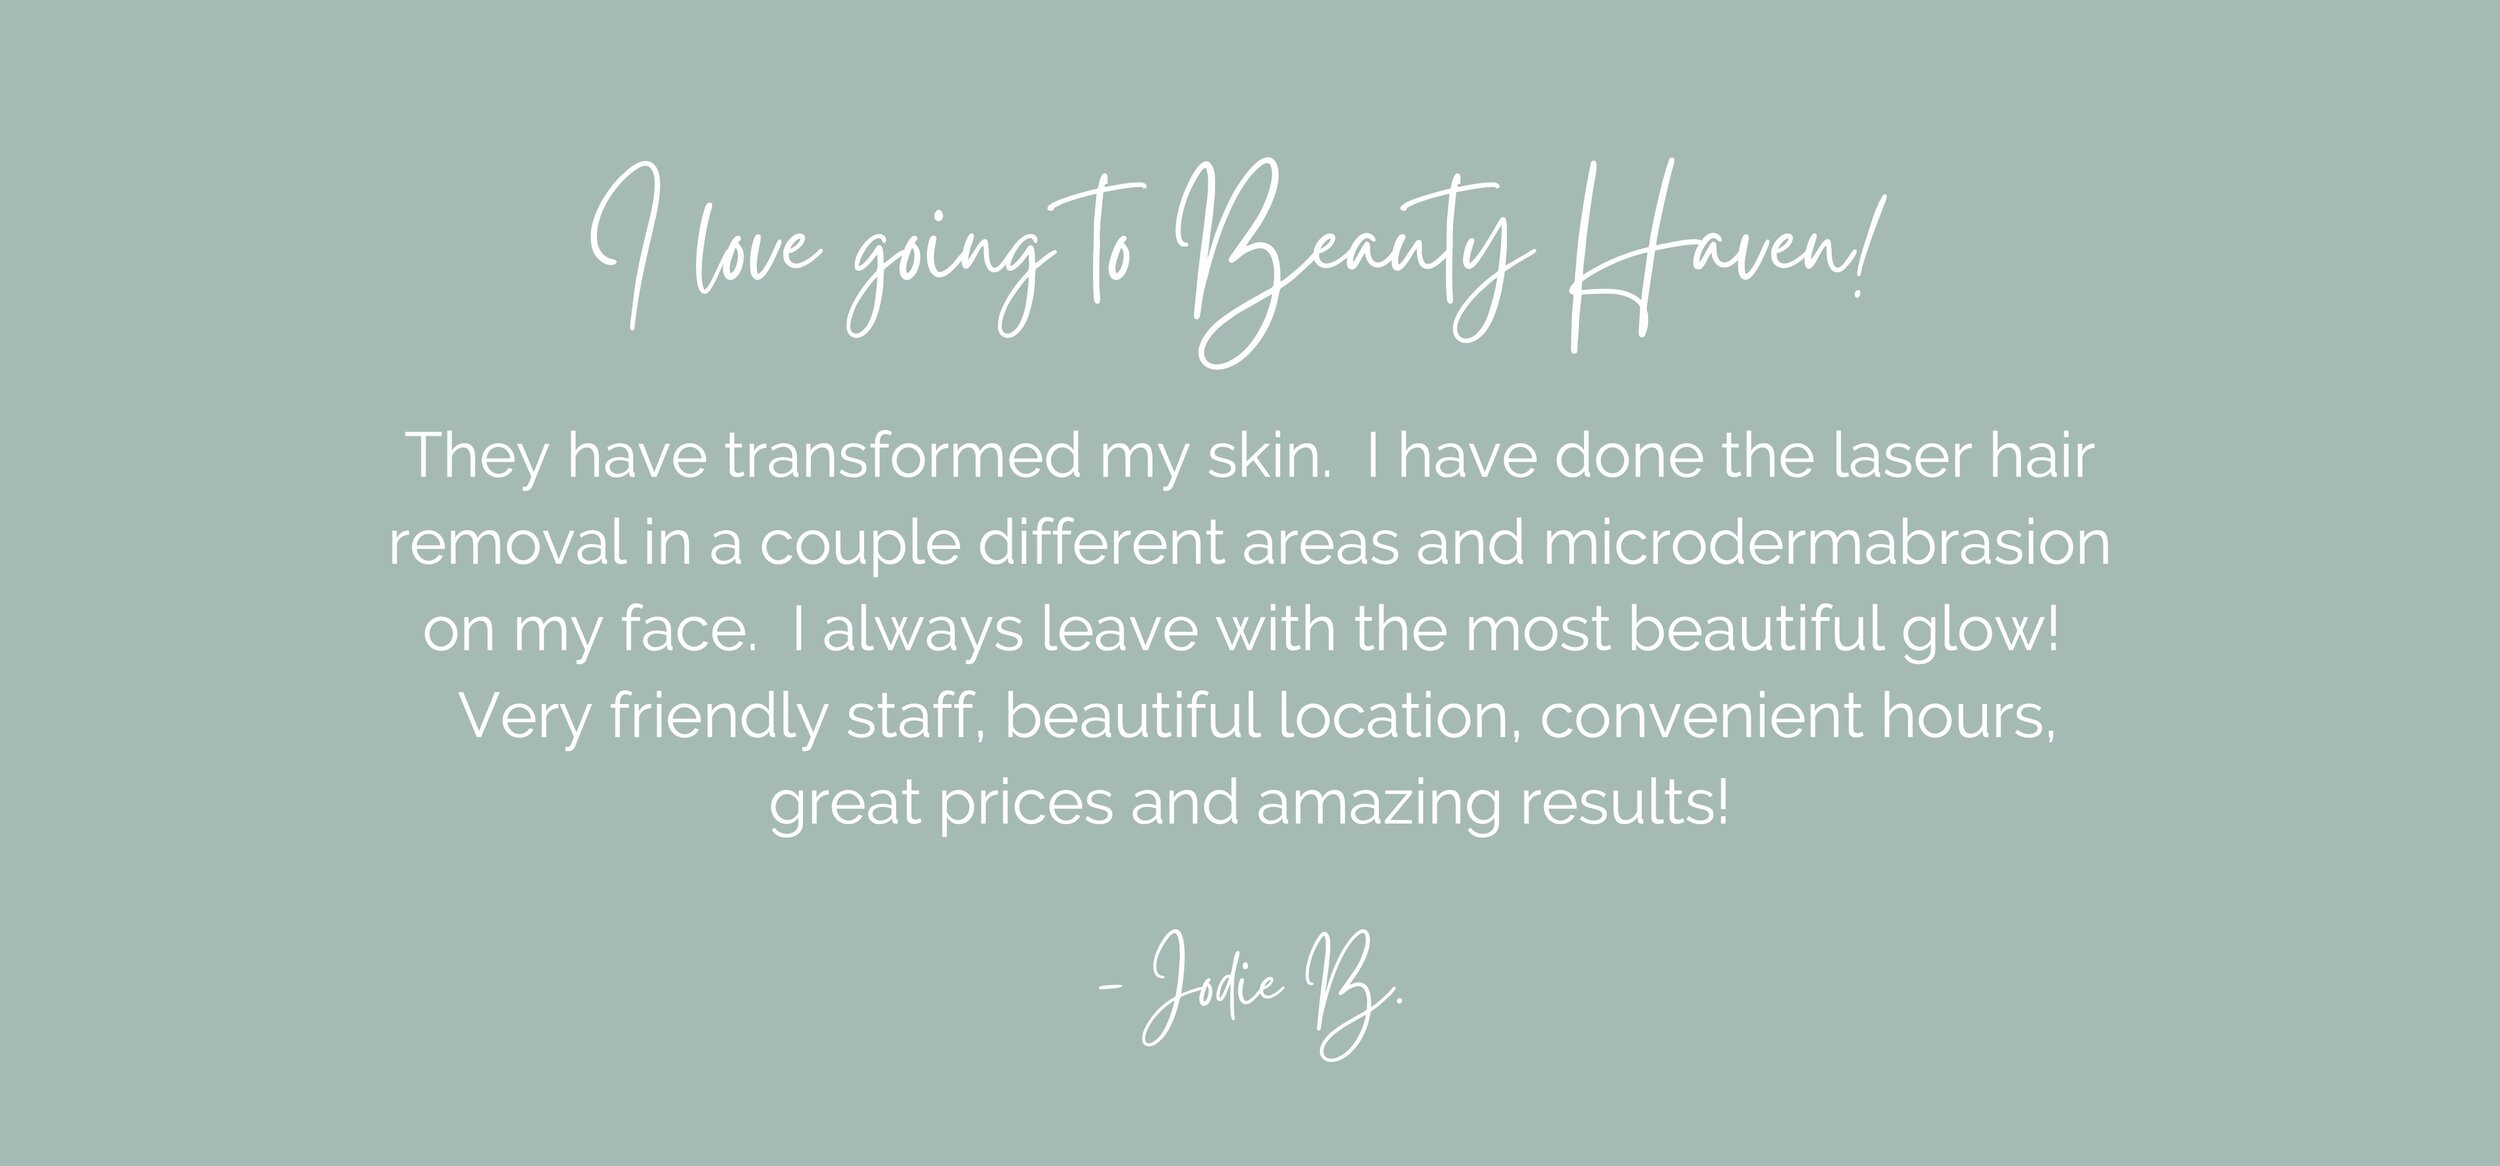 I love going to Beauty Haven! They have transformed my skin. I have done the laser hair removal in a couple different areas and microdermabrasion on my face. I always leave with the most beautiful glow! Very friendly.jpg